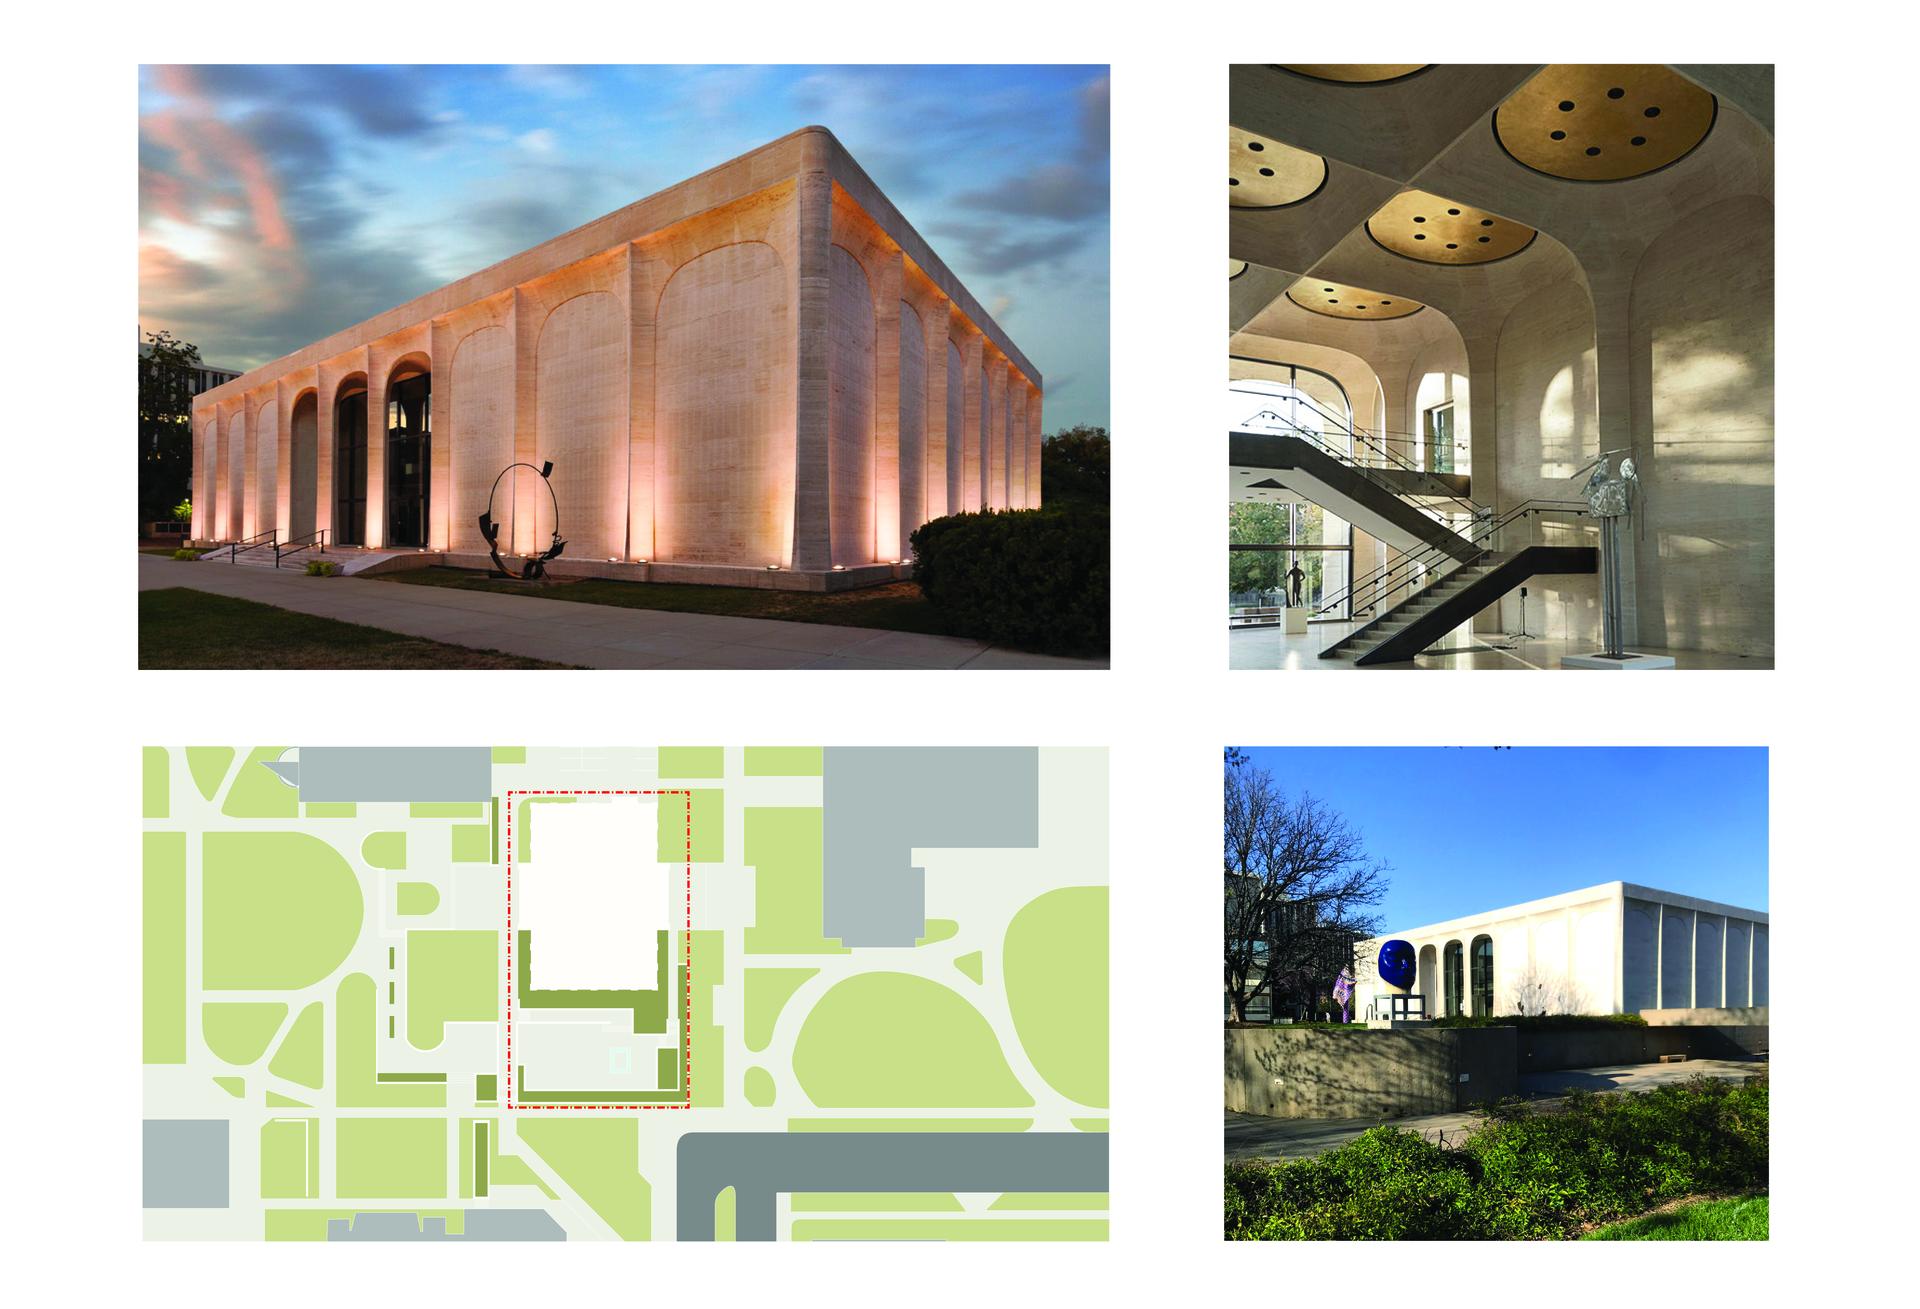 Three photos of the Sheldon art museum, an elegant and white smooth stone building with sleek columns, and a diagrammatic site plan.